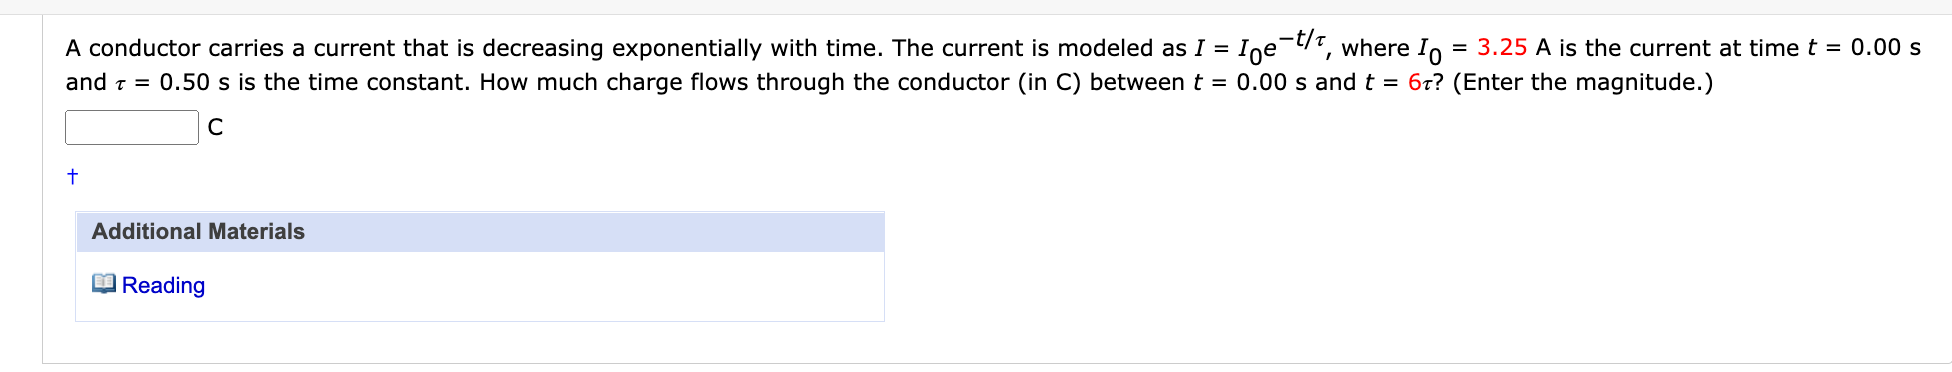 Solved A conductor carries a current that is decreasing | Chegg.com